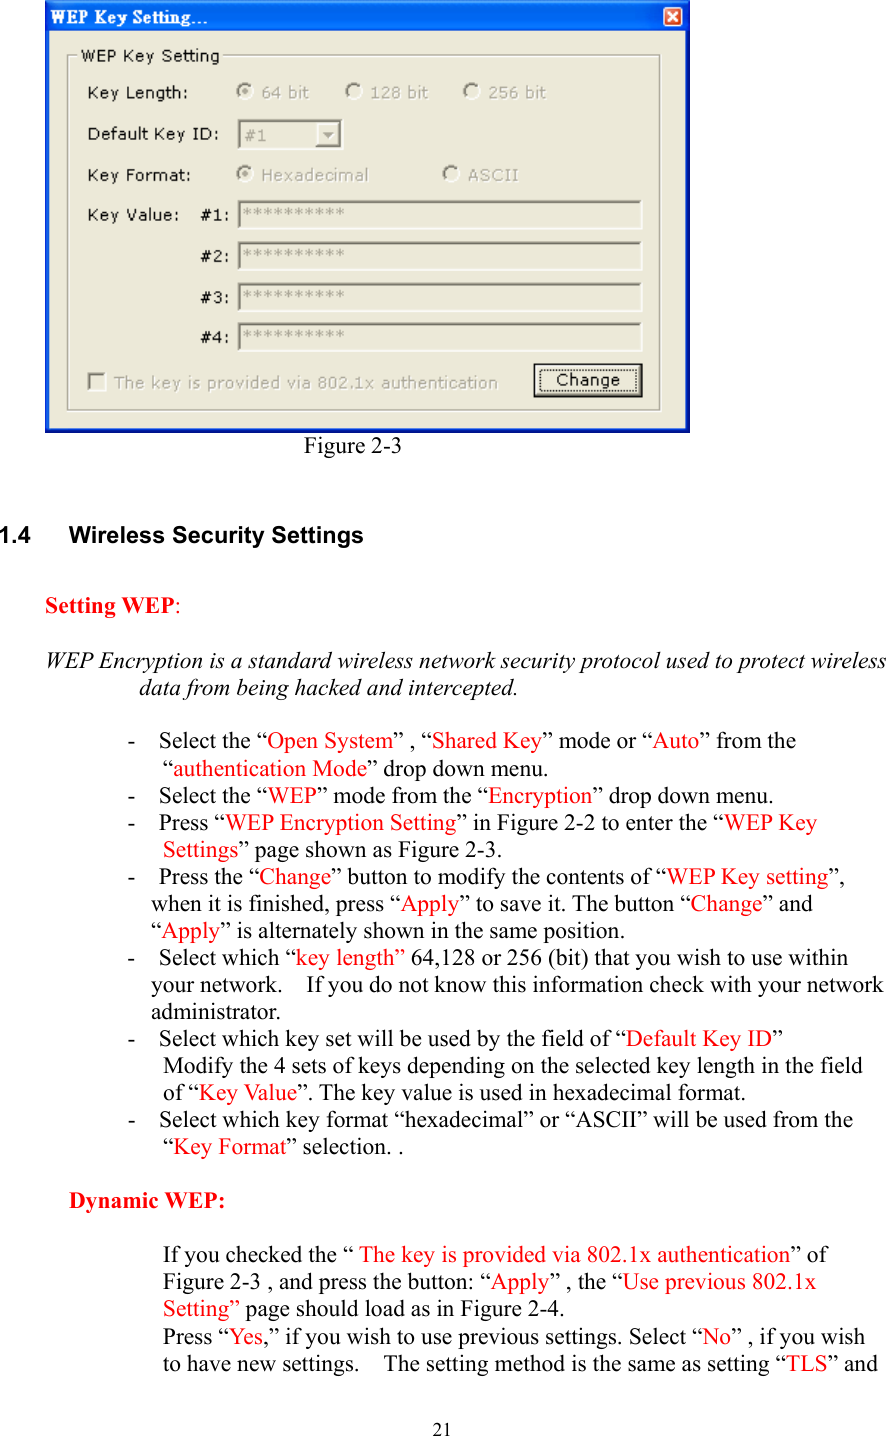  21                        Figure 2-3  1.4 Wireless Security Settings  Setting WEP:  WEP Encryption is a standard wireless network security protocol used to protect wireless data from being hacked and intercepted.  -  Select the “Open System” , “Shared Key” mode or “Auto” from the “authentication Mode” drop down menu. -  Select the “WEP” mode from the “Encryption” drop down menu.   -  Press “WEP Encryption Setting” in Figure 2-2 to enter the “WEP Key Settings” page shown as Figure 2-3. -  Press the “Change” button to modify the contents of “WEP Key setting”, when it is finished, press “Apply” to save it. The button “Change” and “Apply” is alternately shown in the same position. -  Select which “key length” 64,128 or 256 (bit) that you wish to use within your network.    If you do not know this information check with your network administrator. -    Select which key set will be used by the field of “Default Key ID” Modify the 4 sets of keys depending on the selected key length in the field of “Key Value”. The key value is used in hexadecimal format. -    Select which key format “hexadecimal” or “ASCII” will be used from the “Key Format” selection. .  Dynamic WEP:  If you checked the “ The key is provided via 802.1x authentication” of Figure 2-3 , and press the button: “Apply” , the “Use previous 802.1x Setting” page should load as in Figure 2-4.   Press “Yes,” if you wish to use previous settings. Select “No” , if you wish to have new settings.    The setting method is the same as setting “TLS” and 